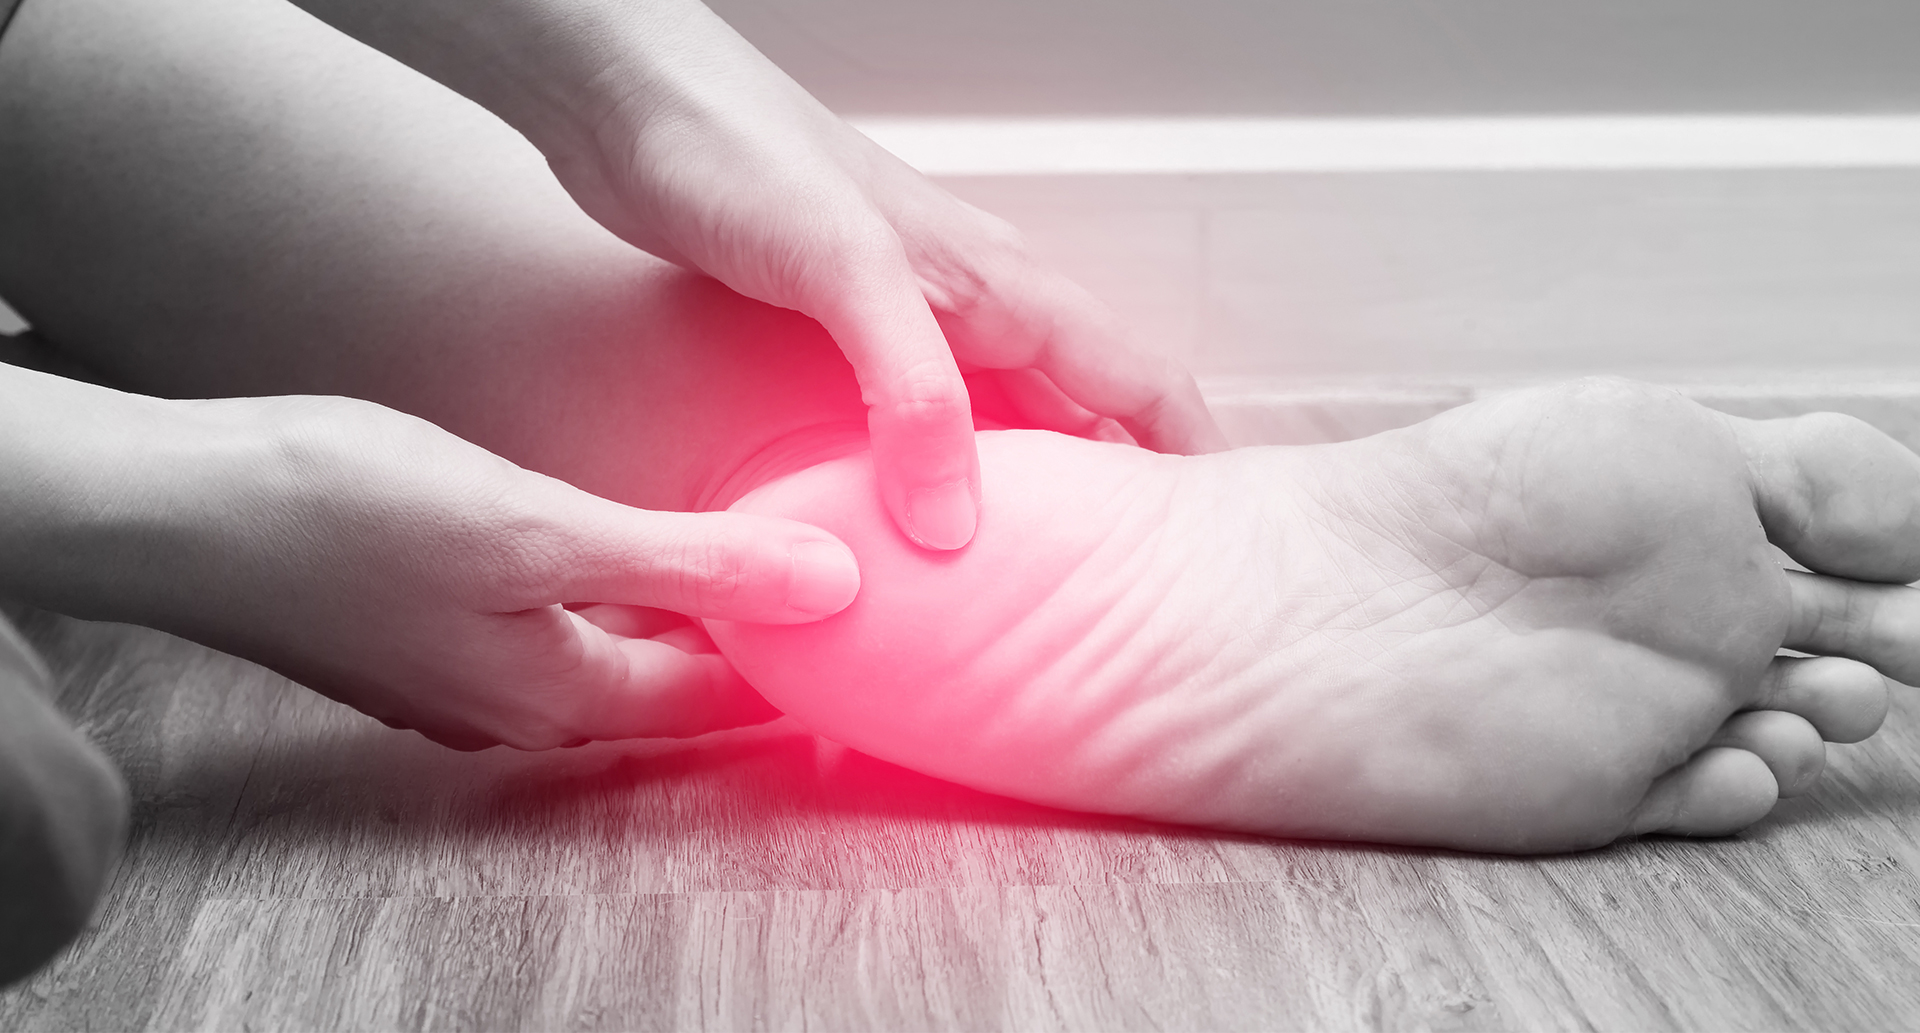 Foot and ankle pain